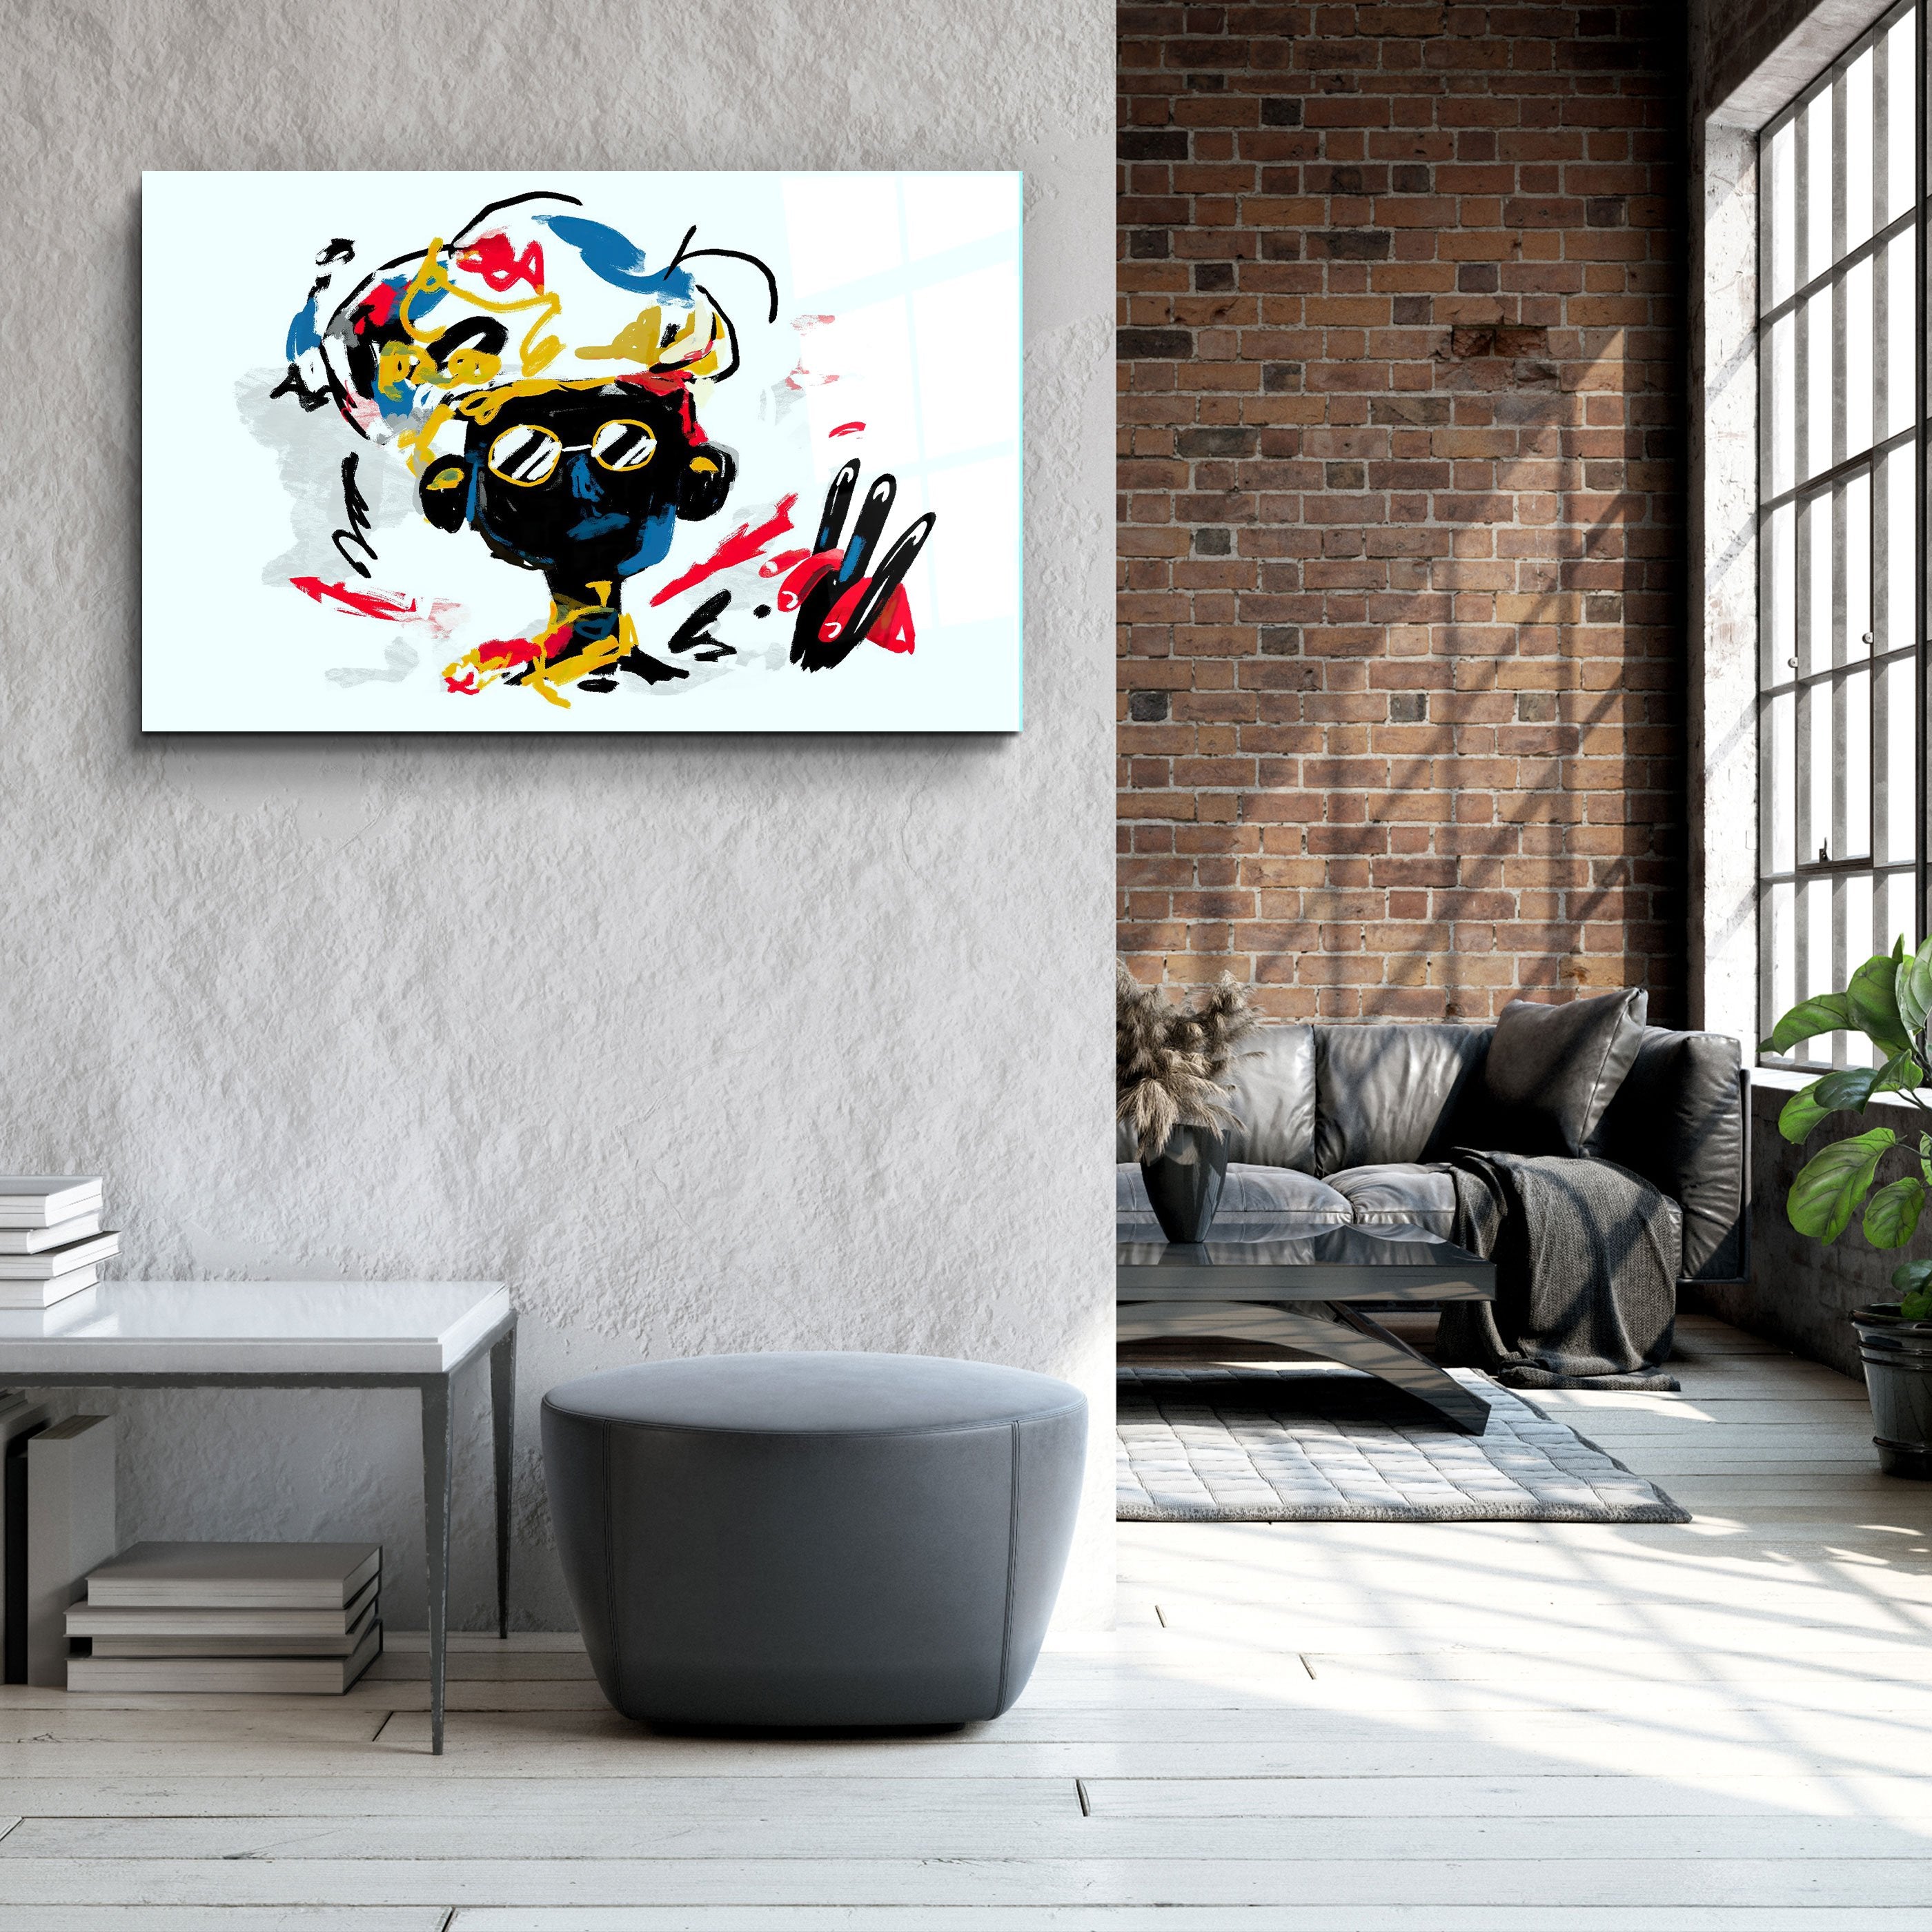 ・"Abstract Colorful Kid"・Glass Wall Art